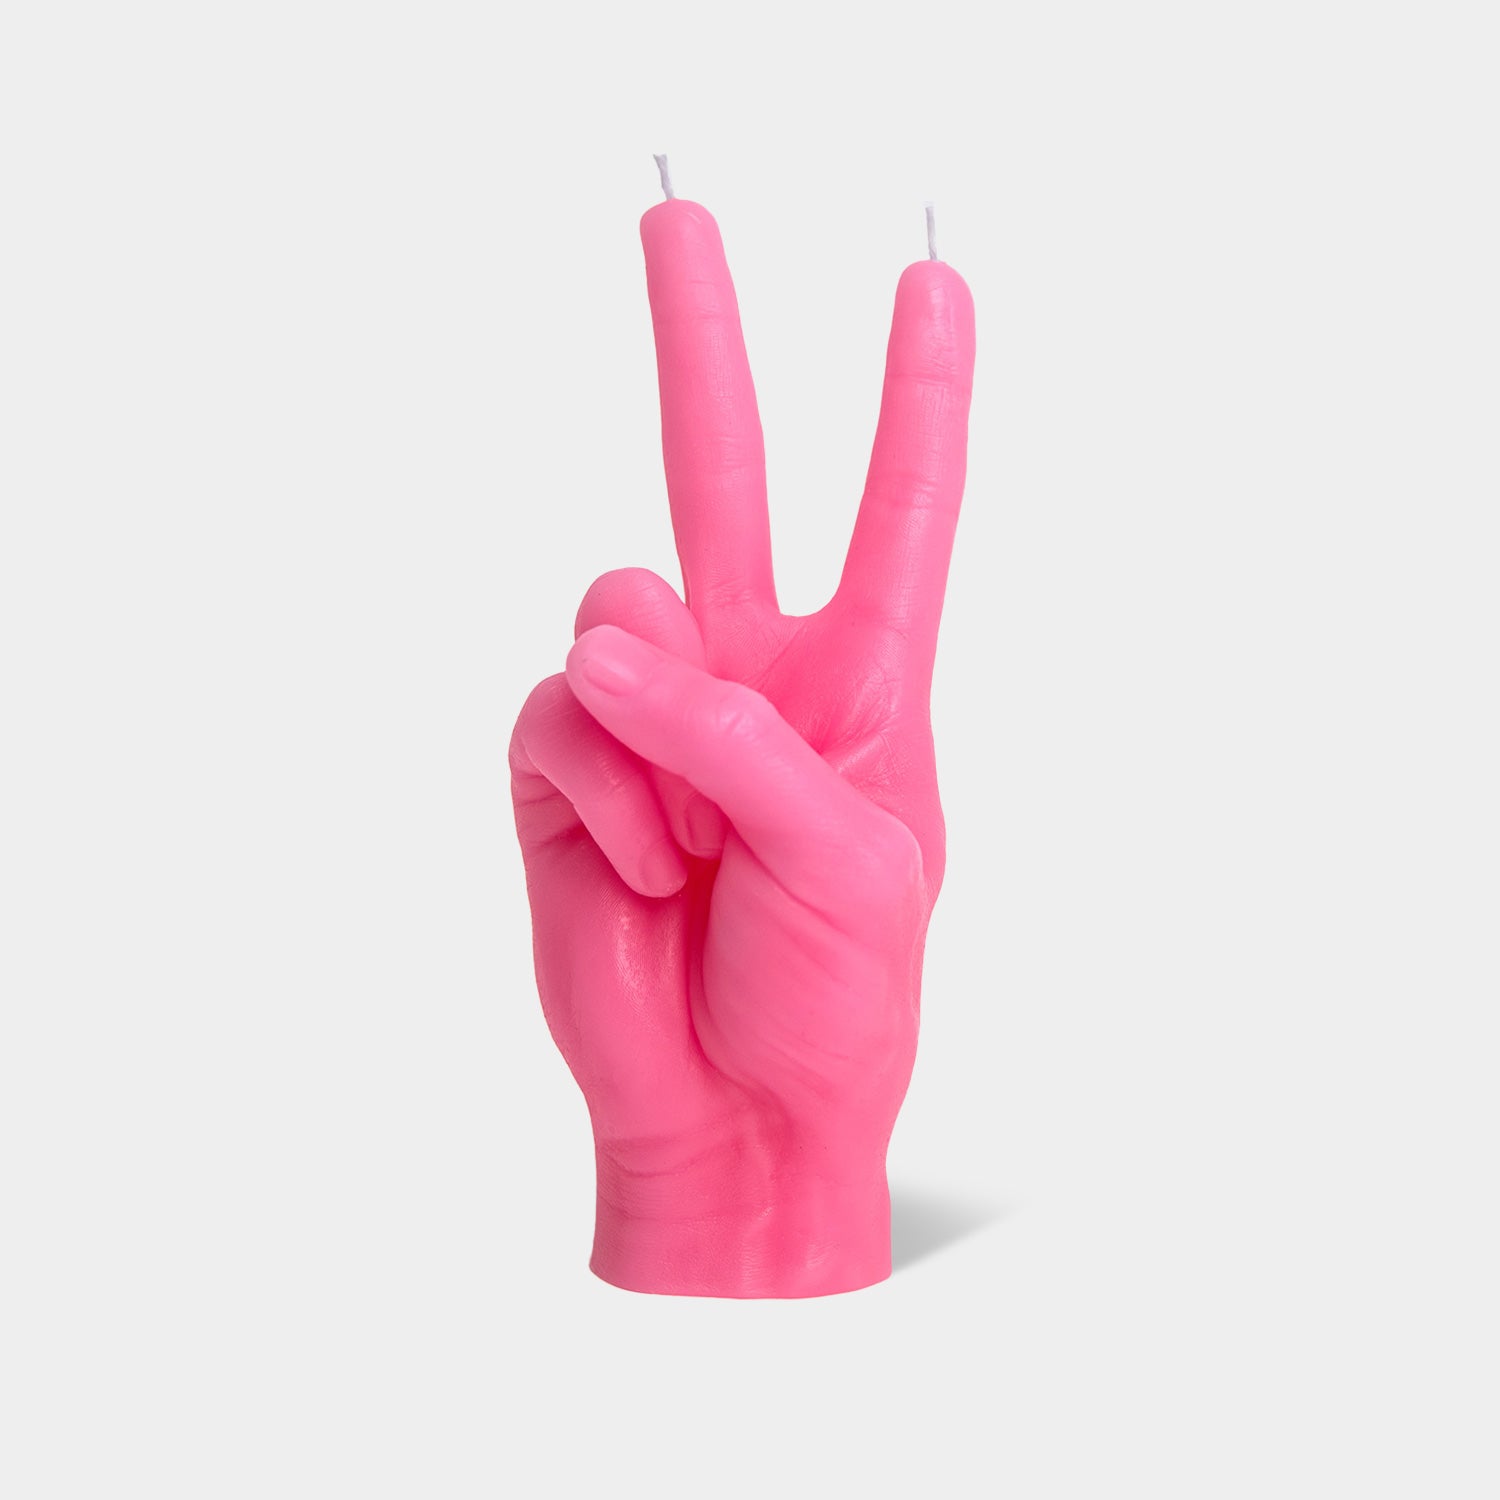 CandleHand "Peace" Candle - Pink